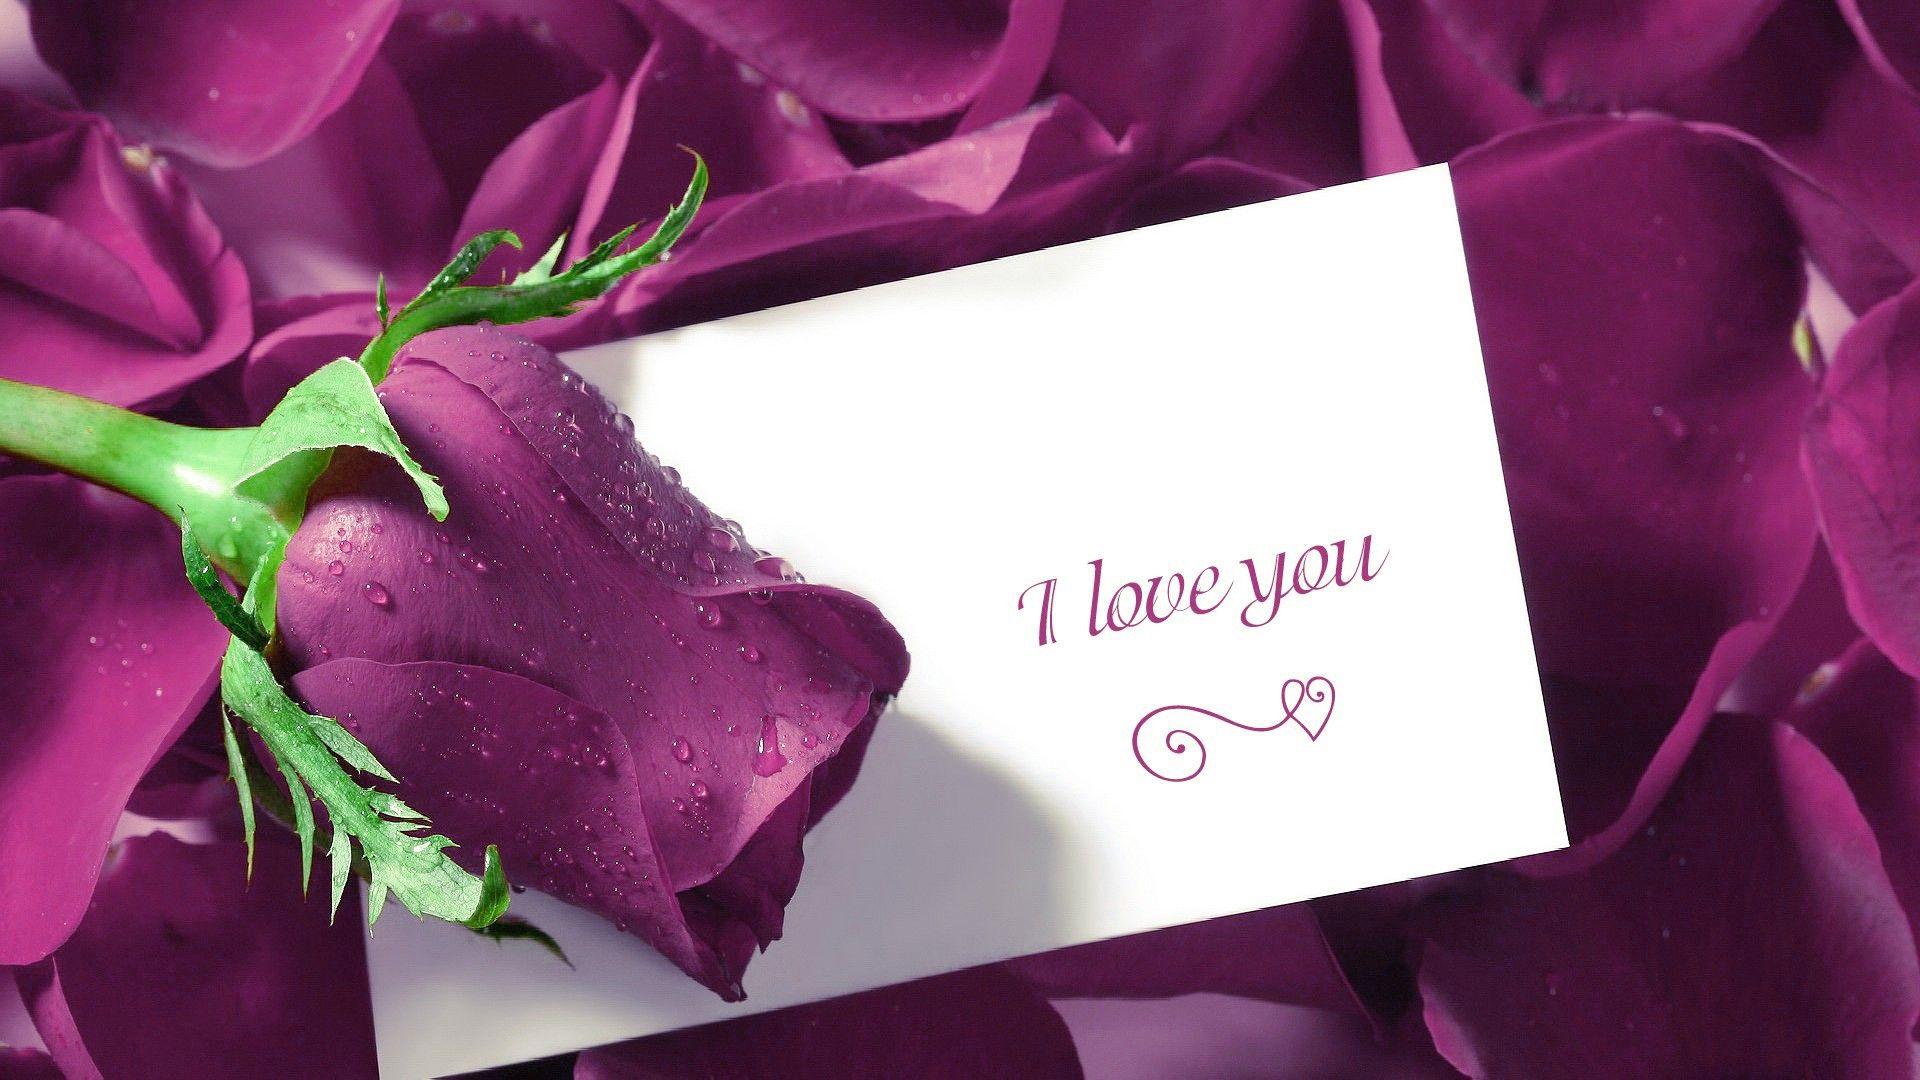 Saying i love you with rose flower image. WallpaperHD.in